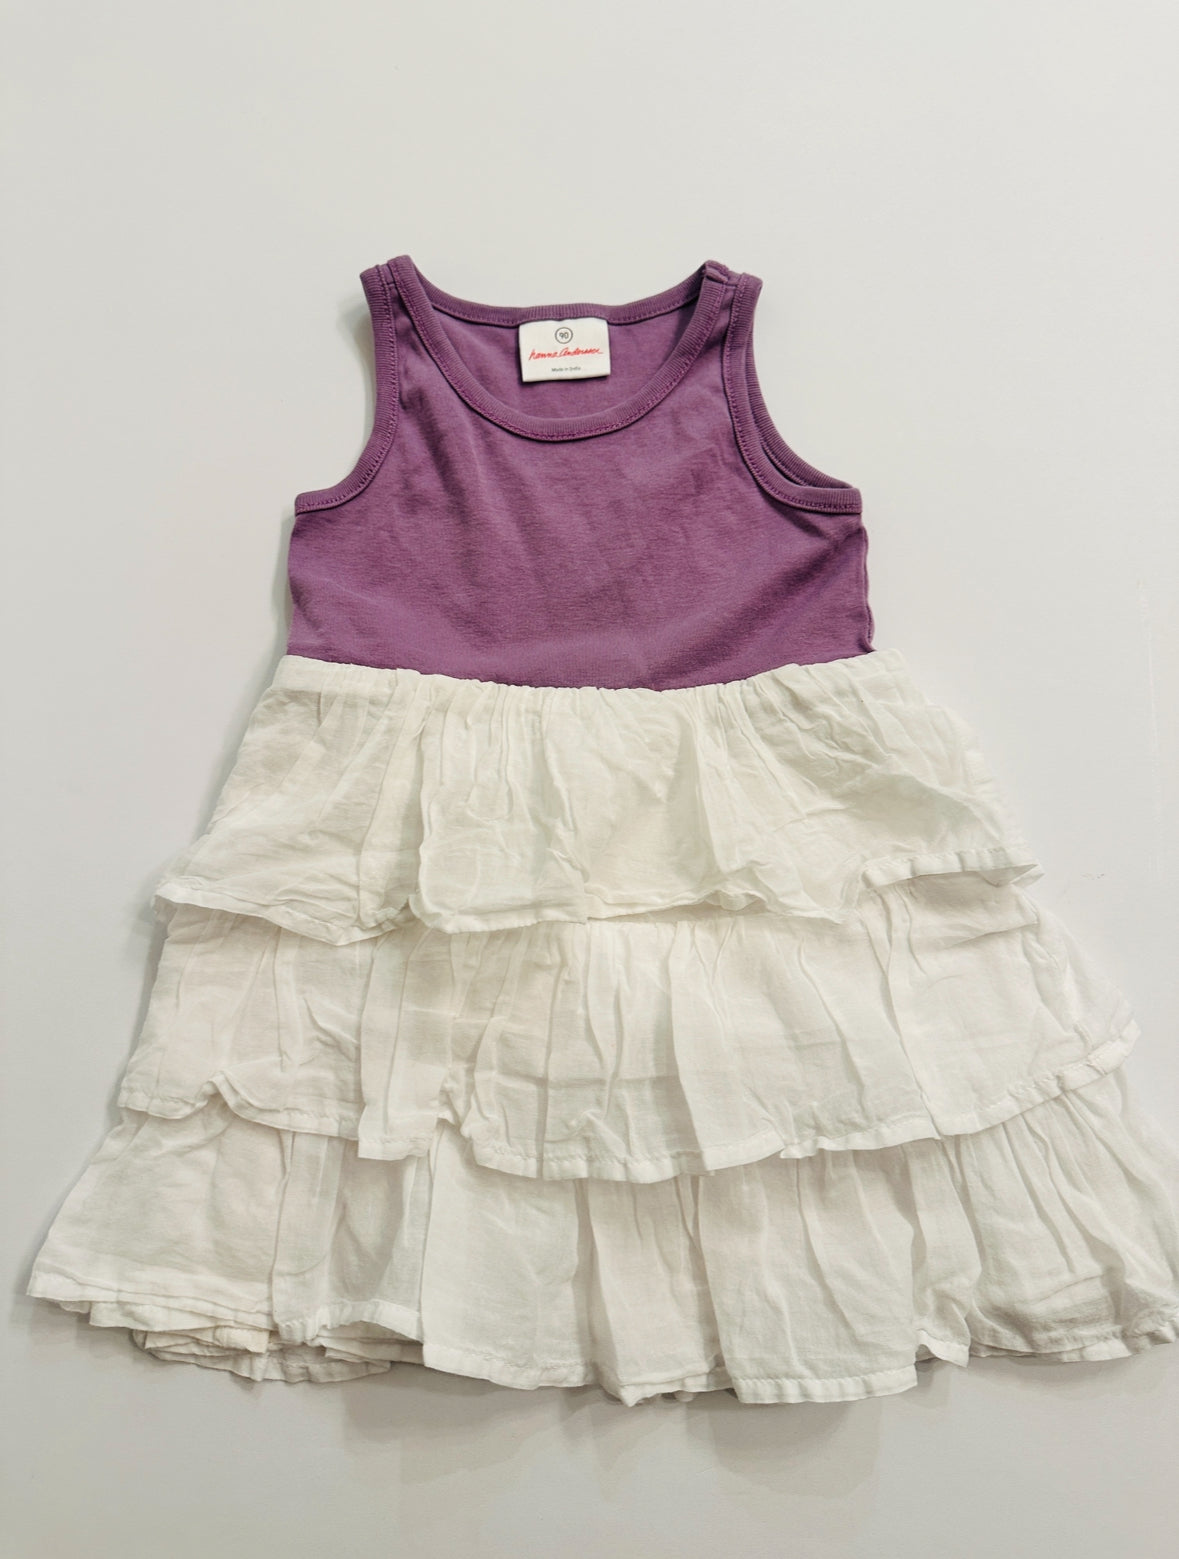 **REDUCED** Hanna Andersson | 3t | GUC | twirl & ruffle